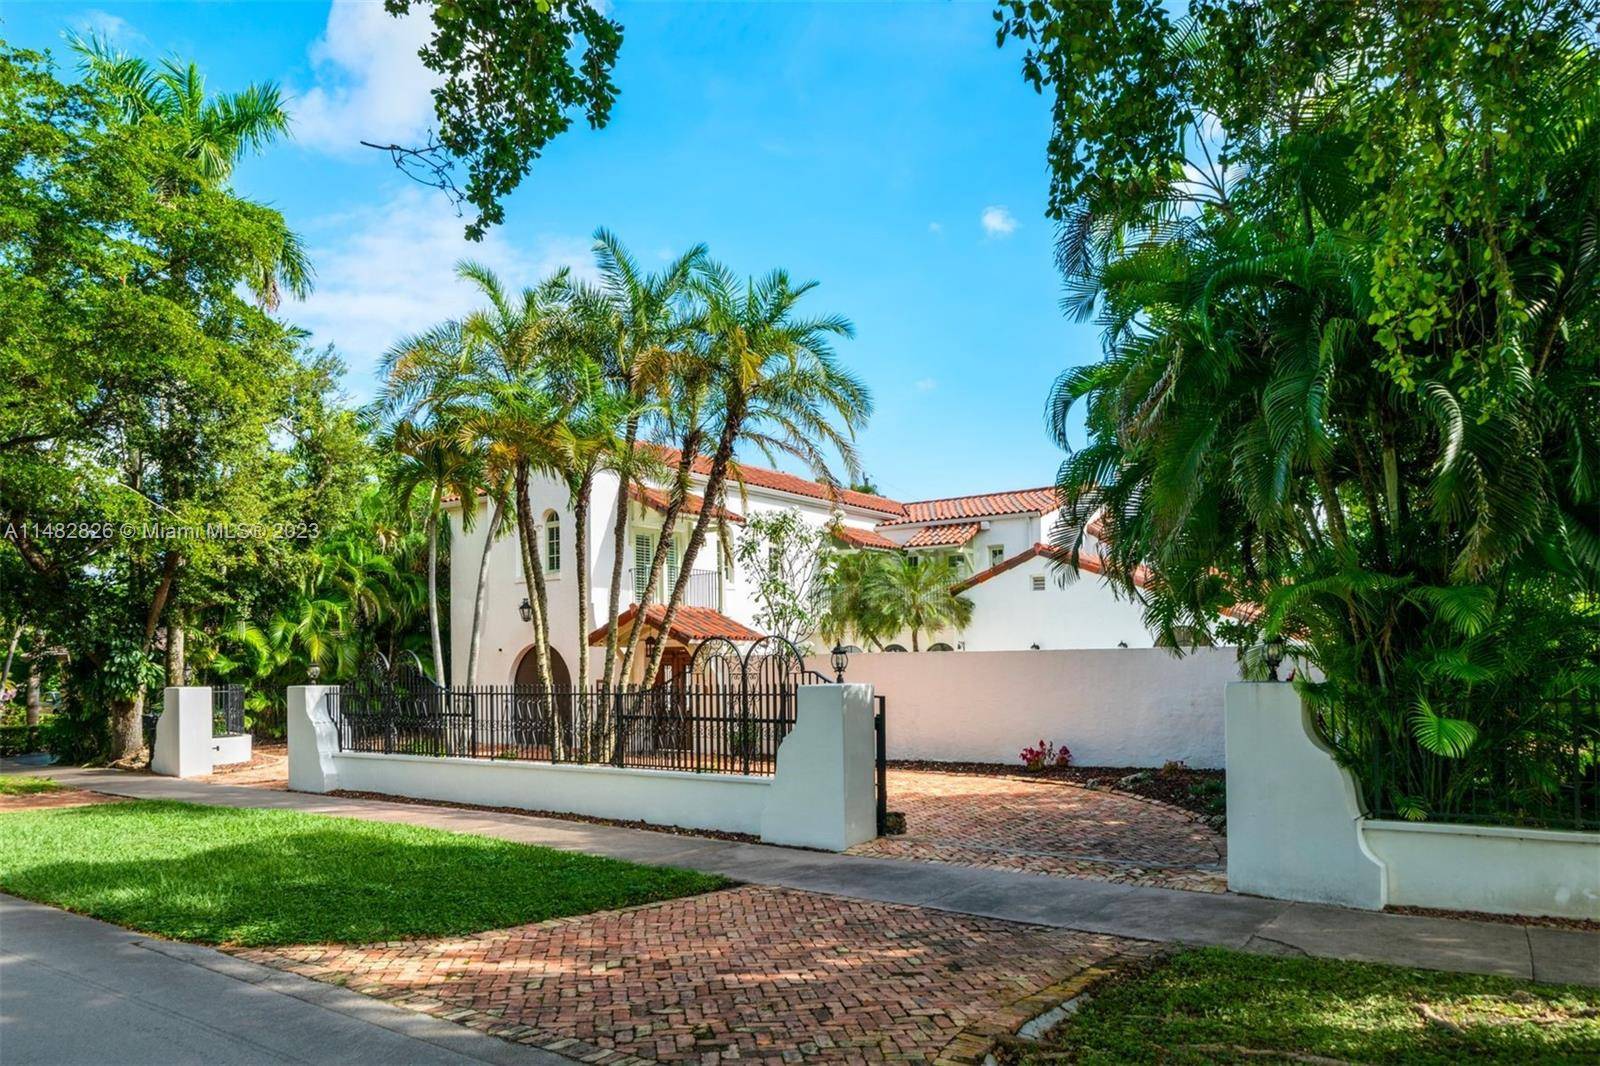 A rare and beautiful Coral Gables 1926 landmark home on a lush 10, 500 SF lot.